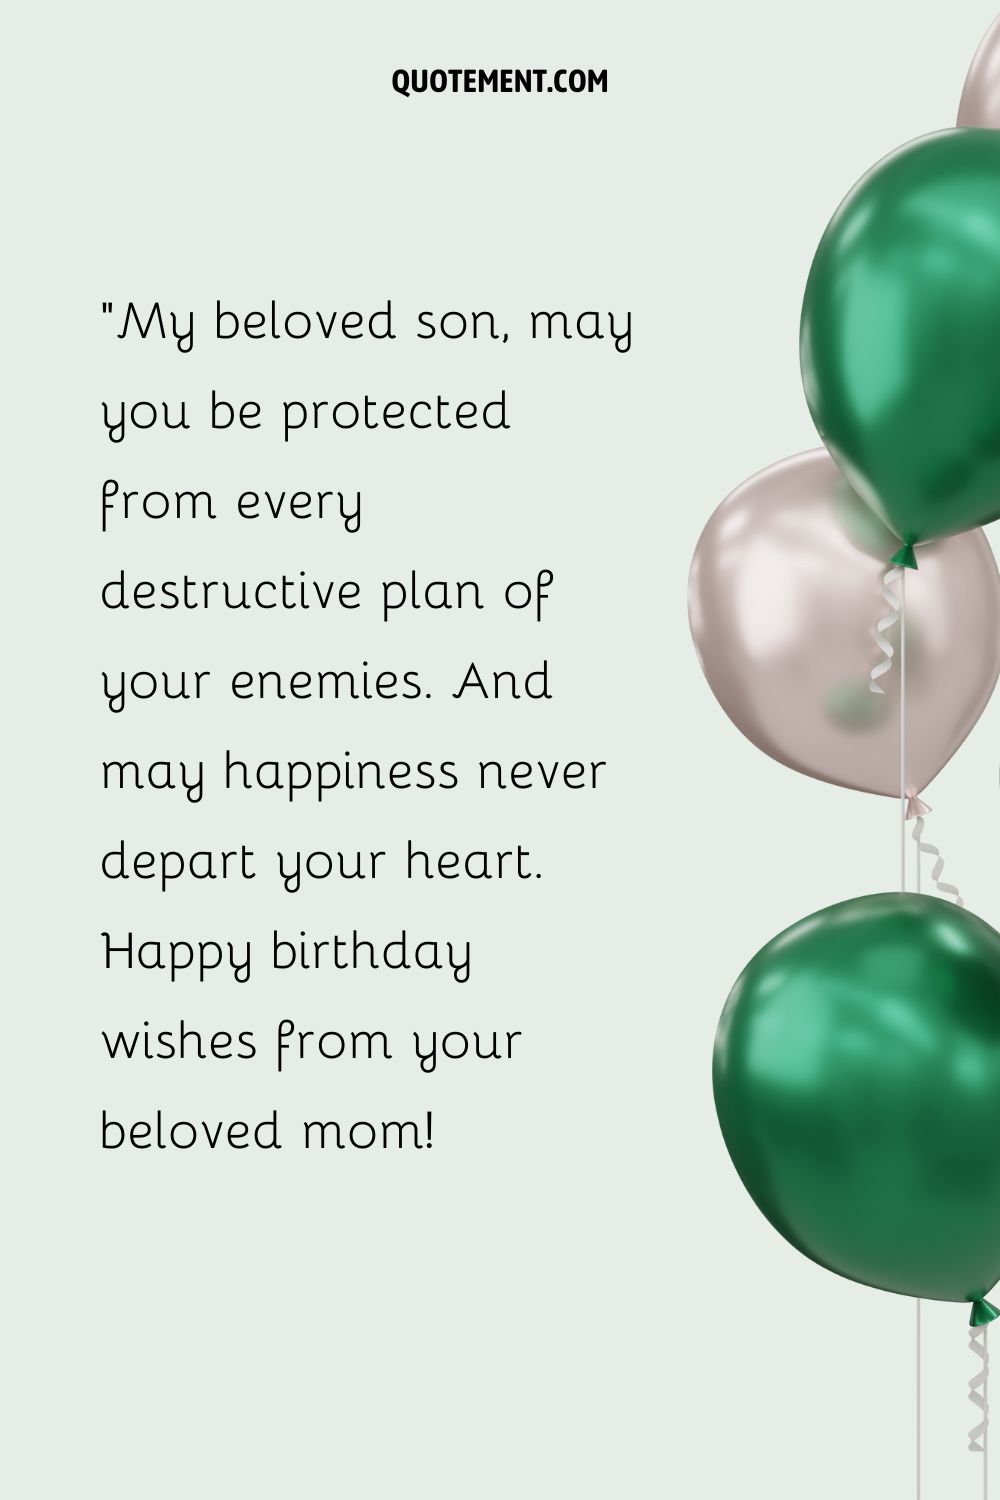 Metallic white and green balloons representing a special birthday prayer to my son